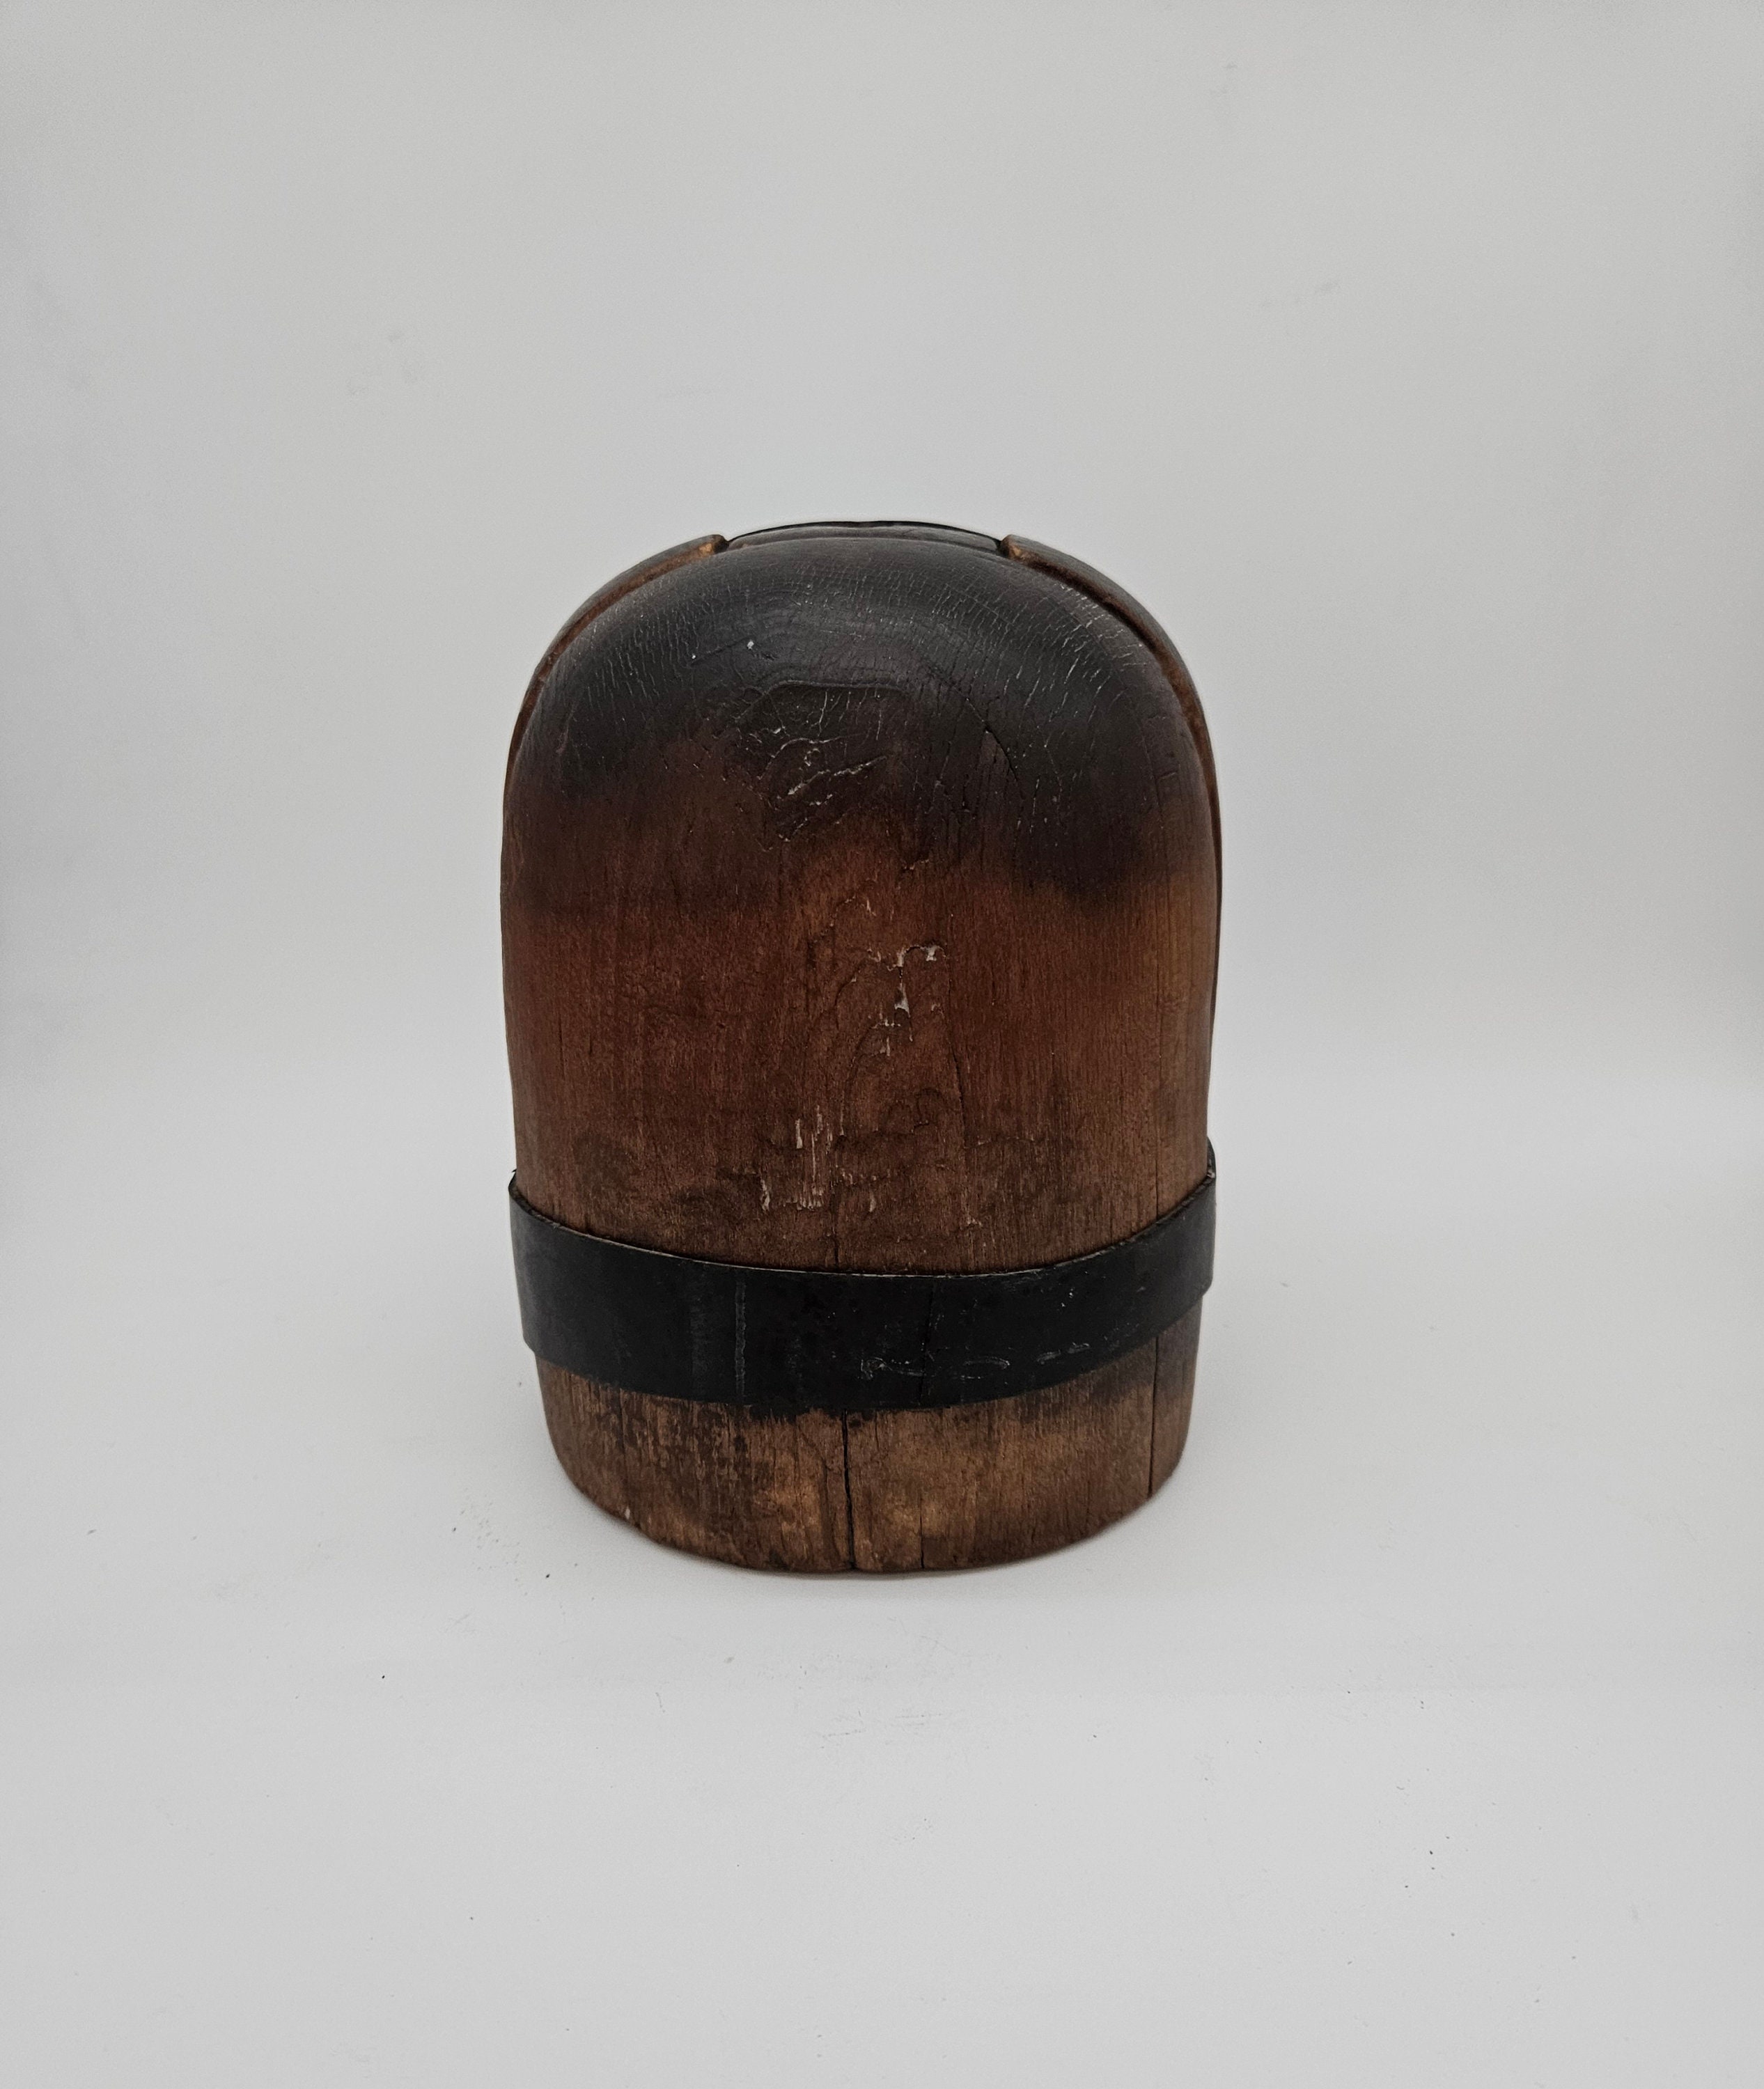 CG Hat Blocks – Home to hand crafted wooden hat blocks.